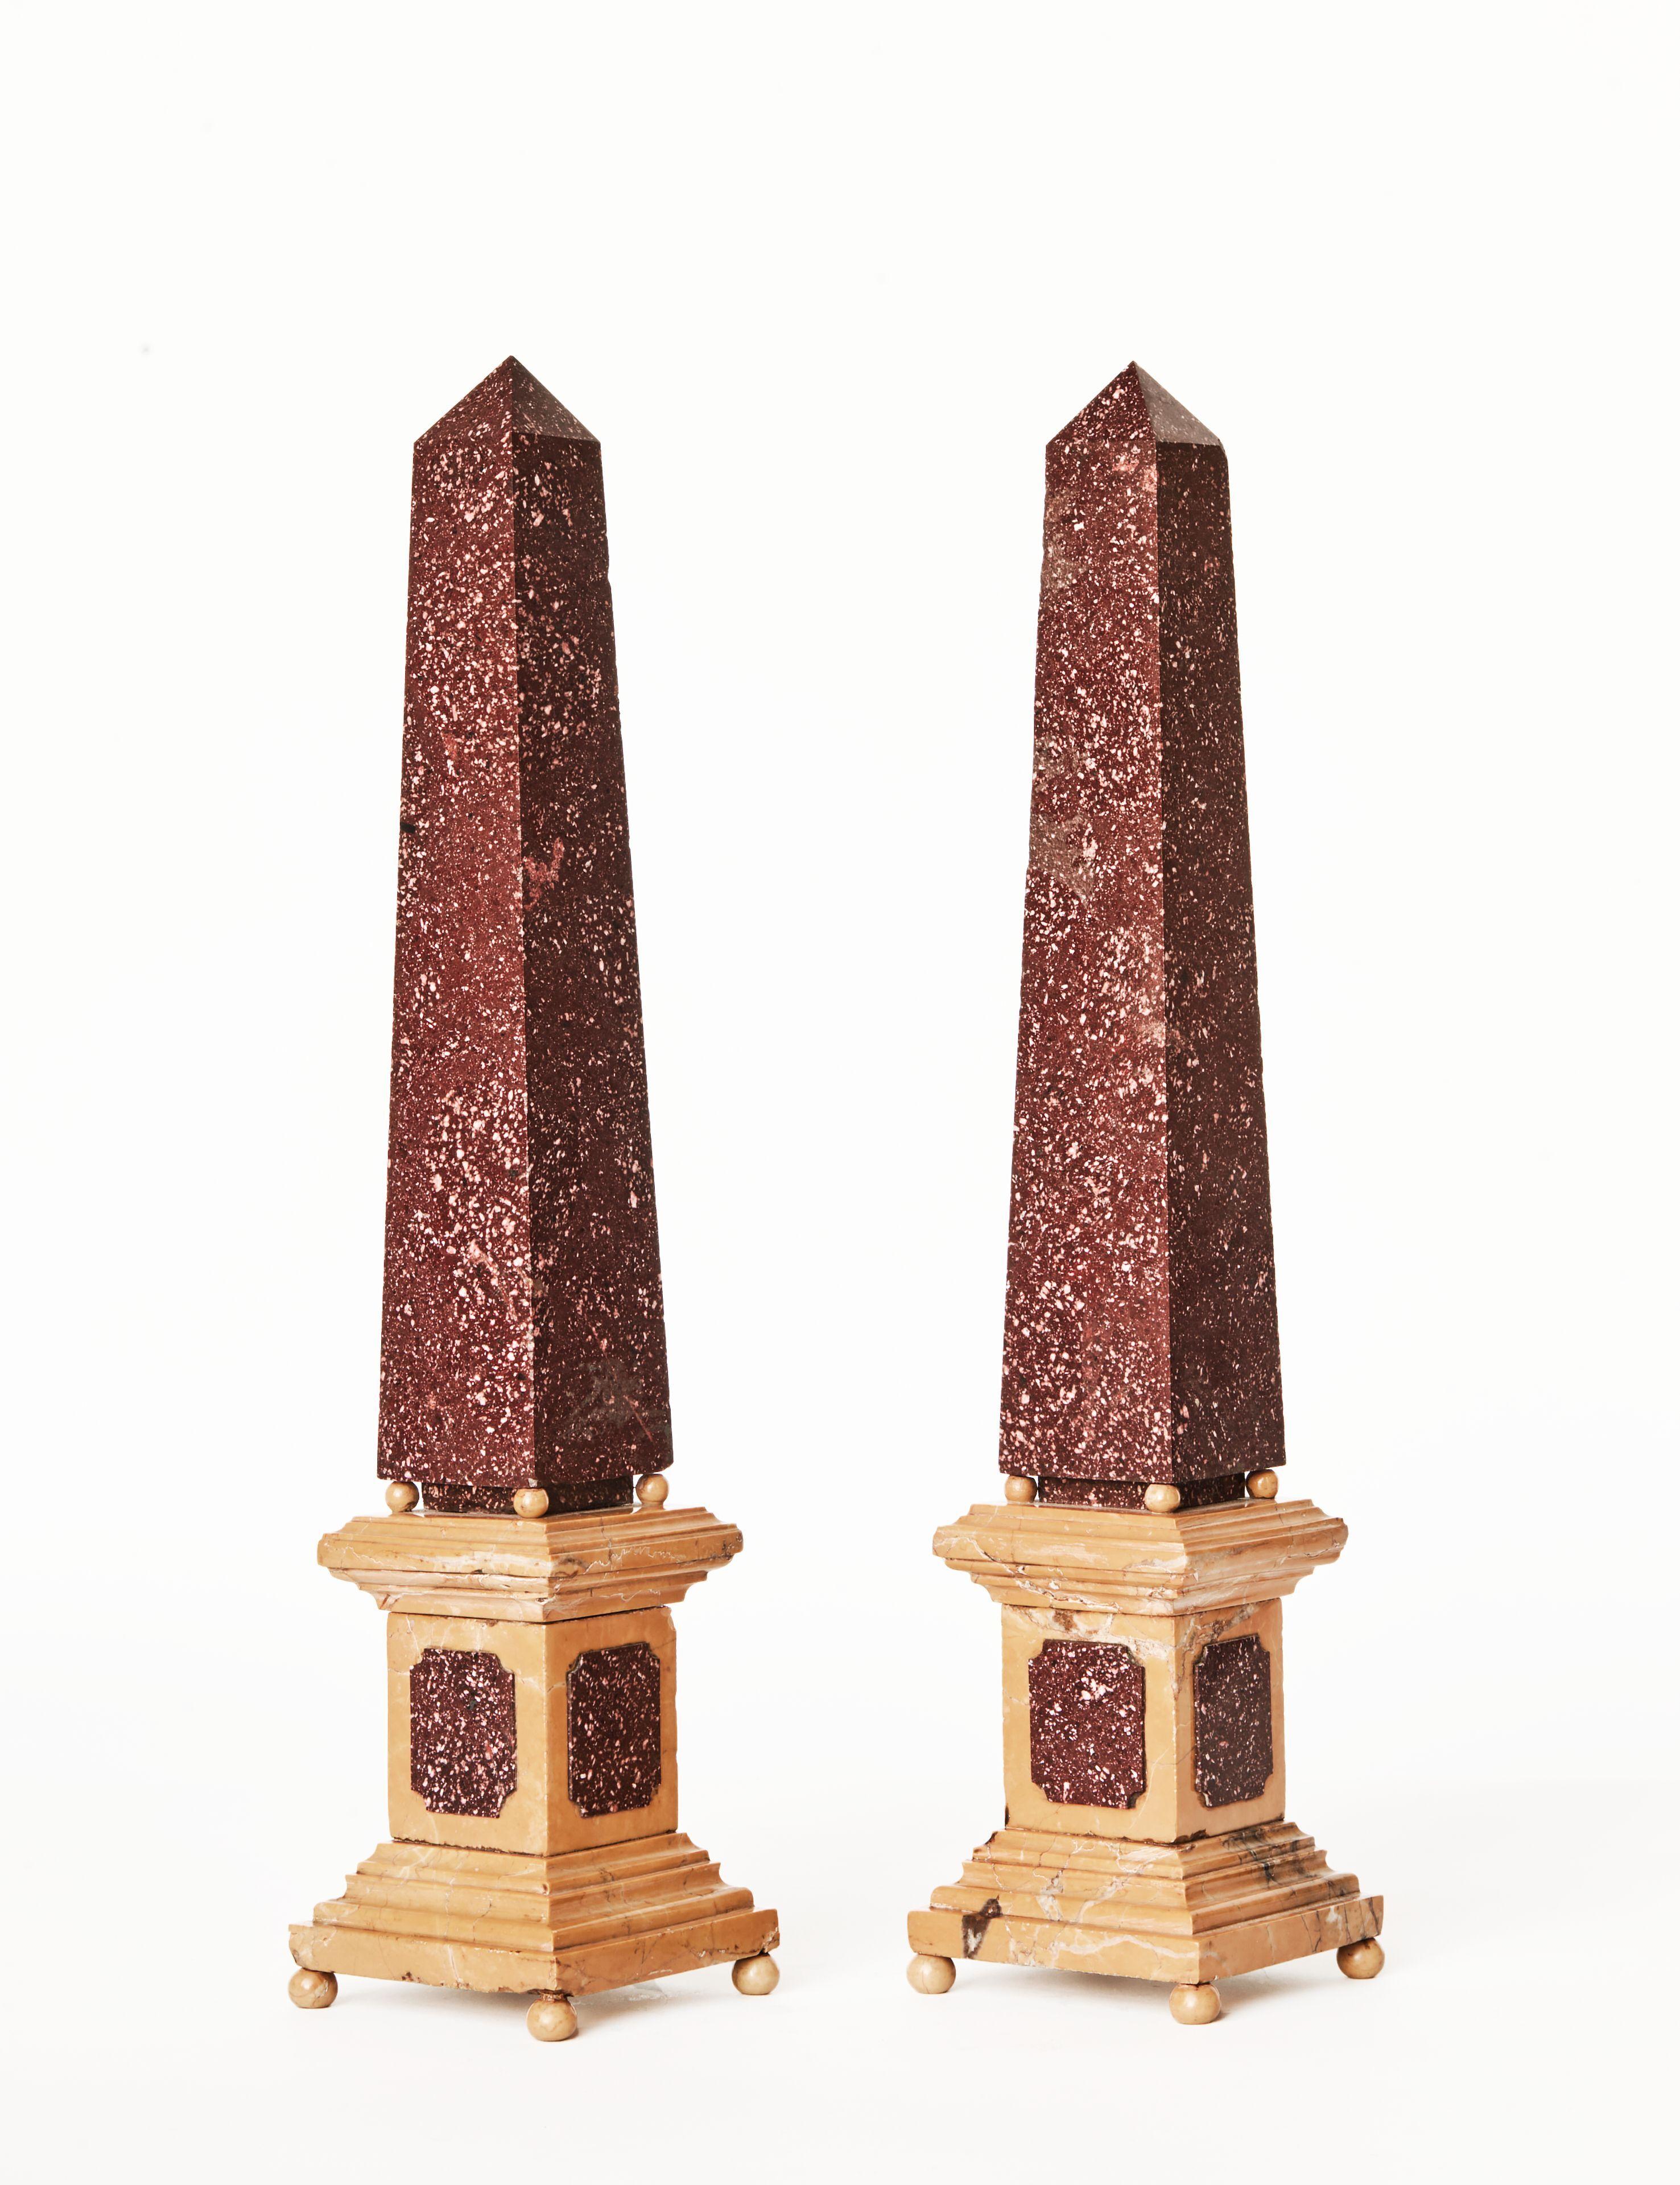 The porphyry obelisks on sienna 'marmo giallo' and porphyry base, condition: 2 small cracks on 1 base and a repair to the other on top of base. Condition commensurate with age and use.